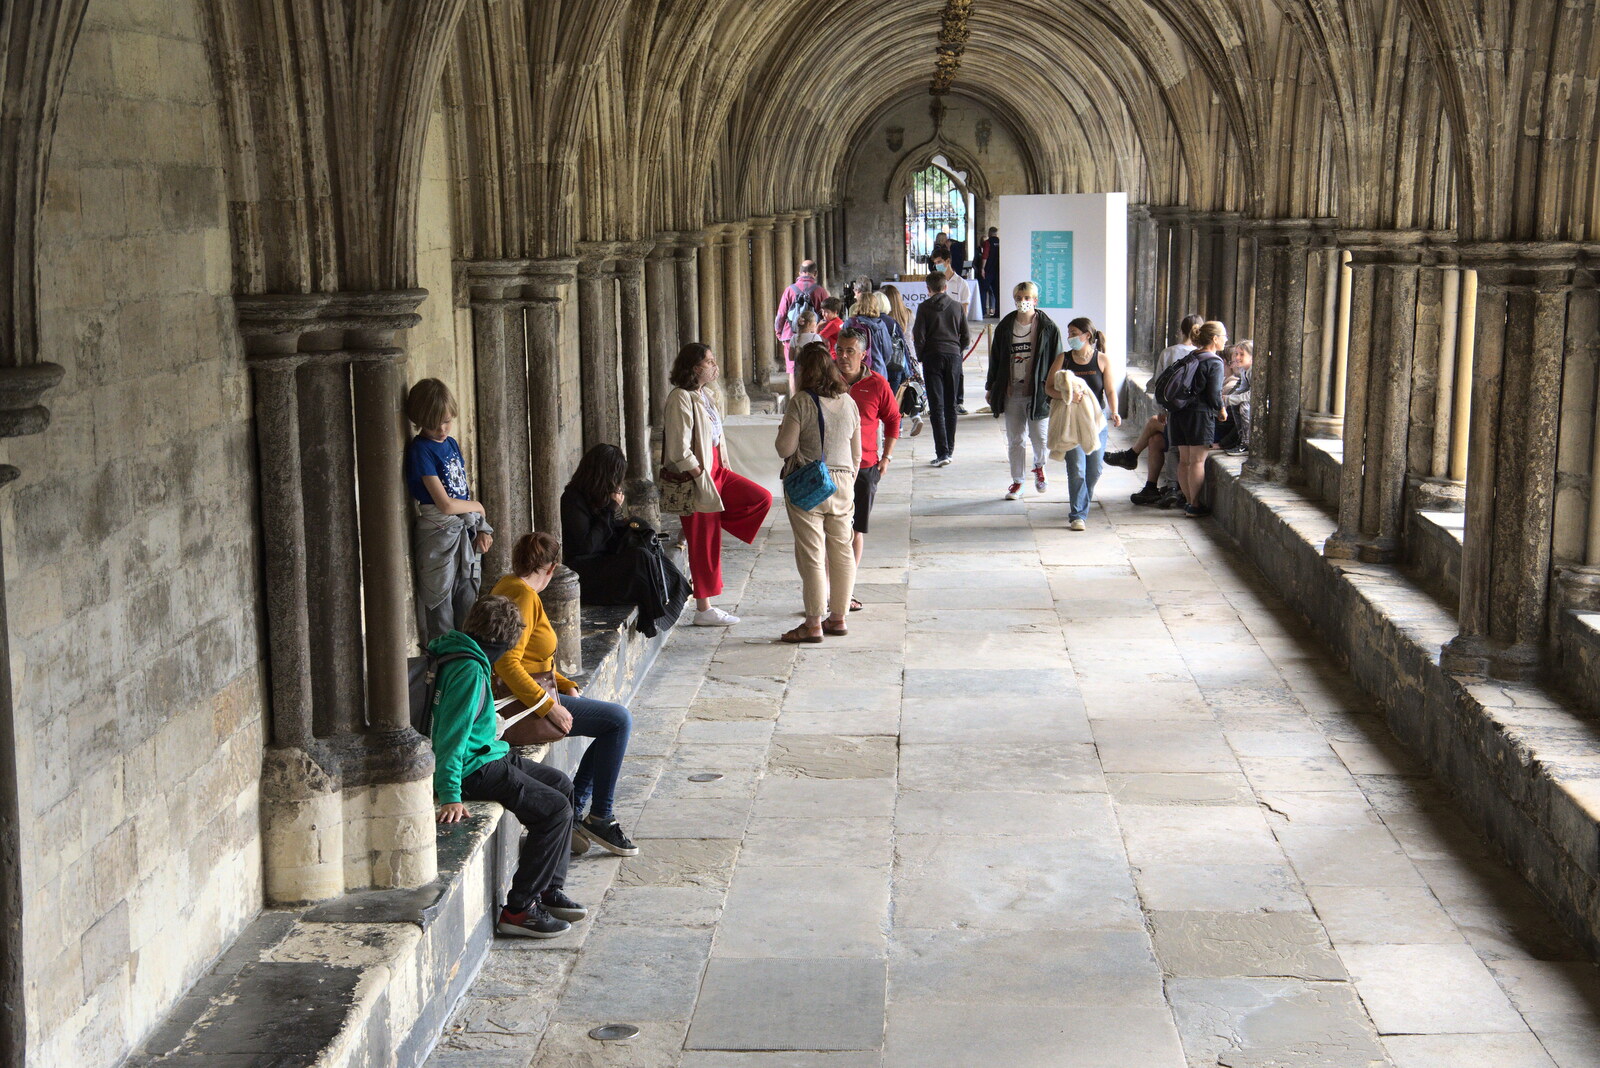 We're back in the cloisters from Dippy and the City Dinosaur Trail, Norwich, Norfolk - 19th August 2021